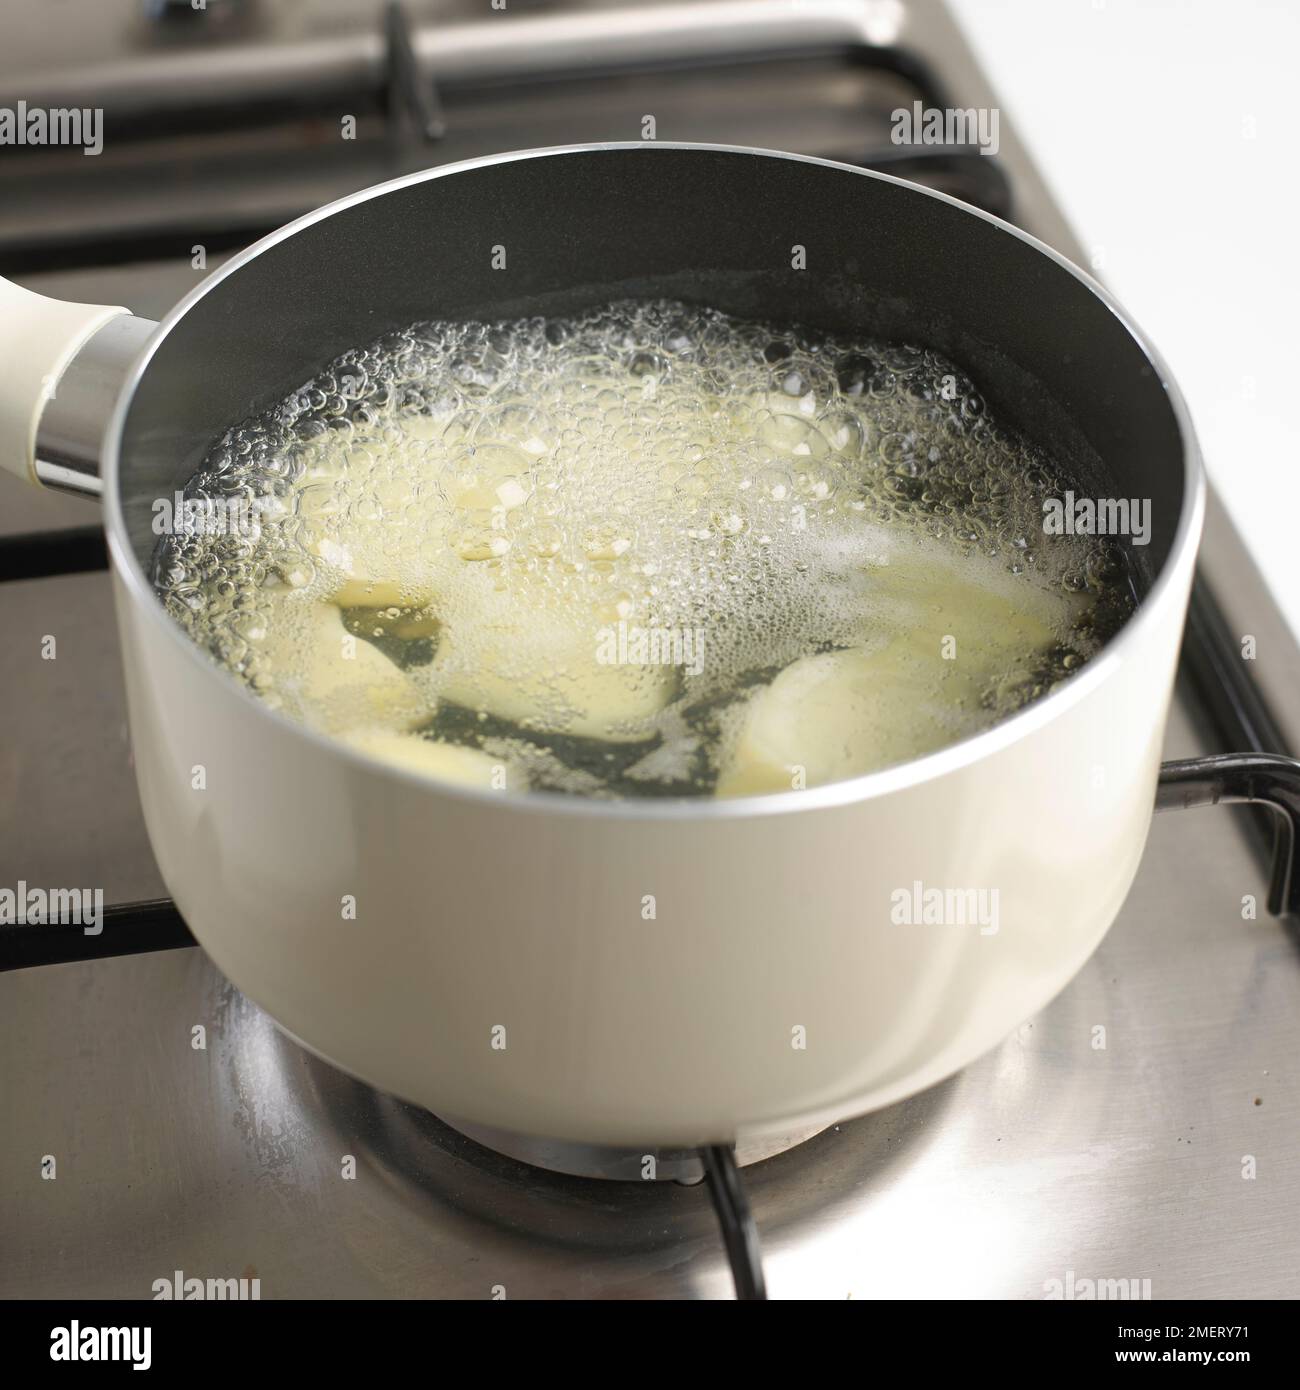 Potatoes cooking in boiling water in a saucepan on cooker Stock Photo